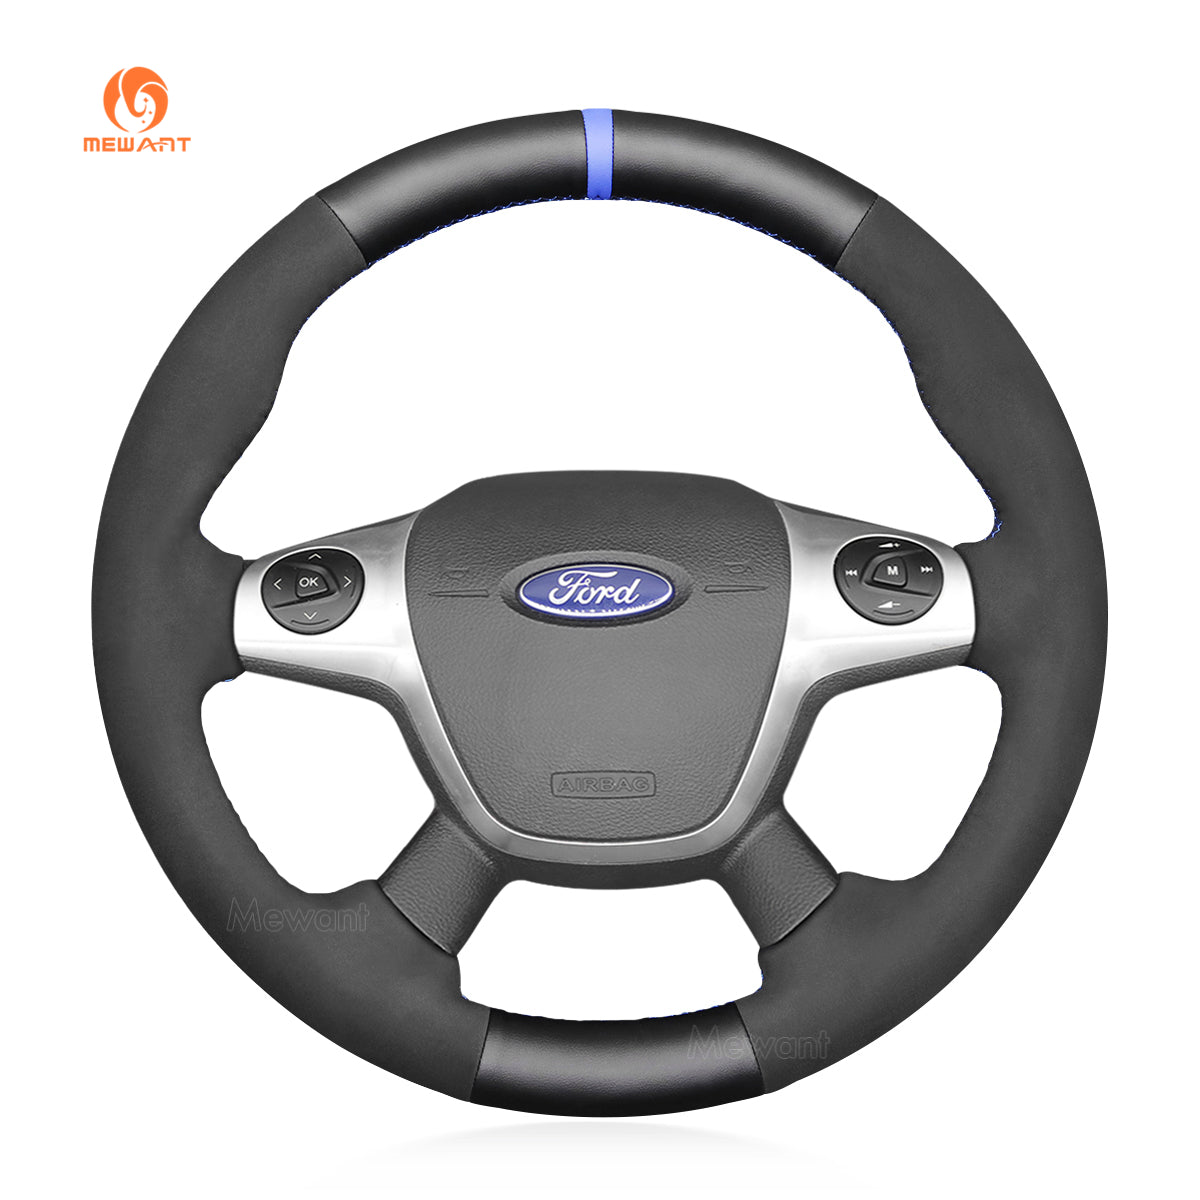 MEWANT Hand Stitch Car Steering Wheel Cover for Ford Focus 2011-2014 / C-Max (Grand C-Max) 2010-2015 / Kuga 2012-2016